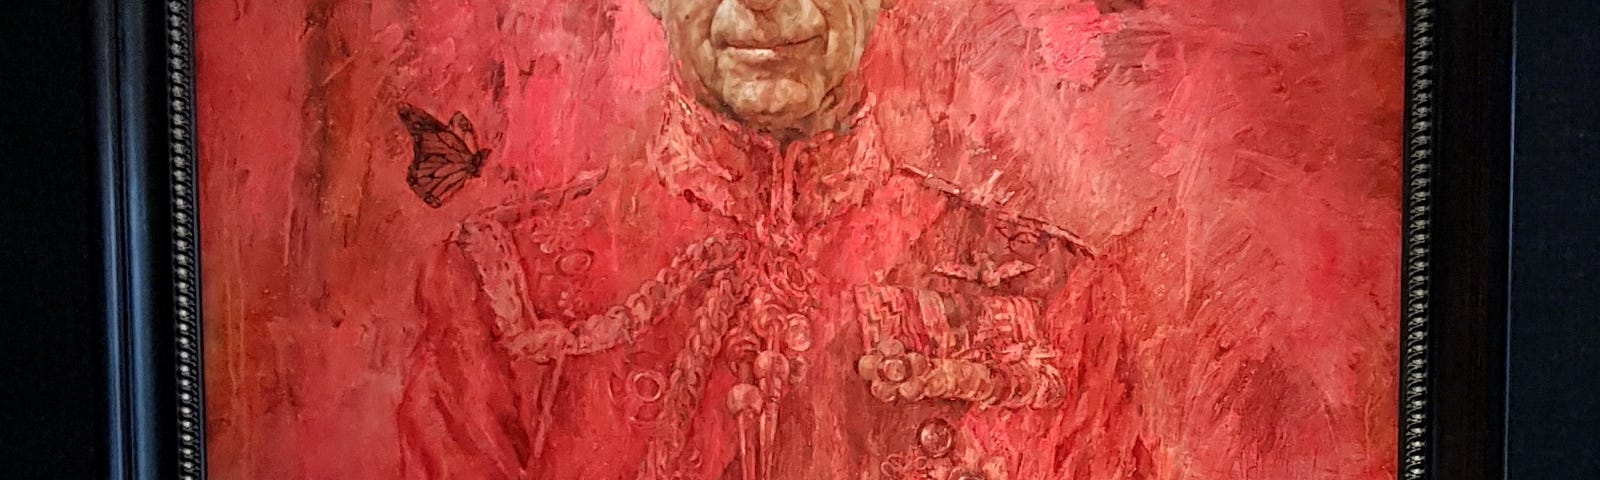 Portrait of King Charles III in red with a black frame, showing his face in natural colouring.